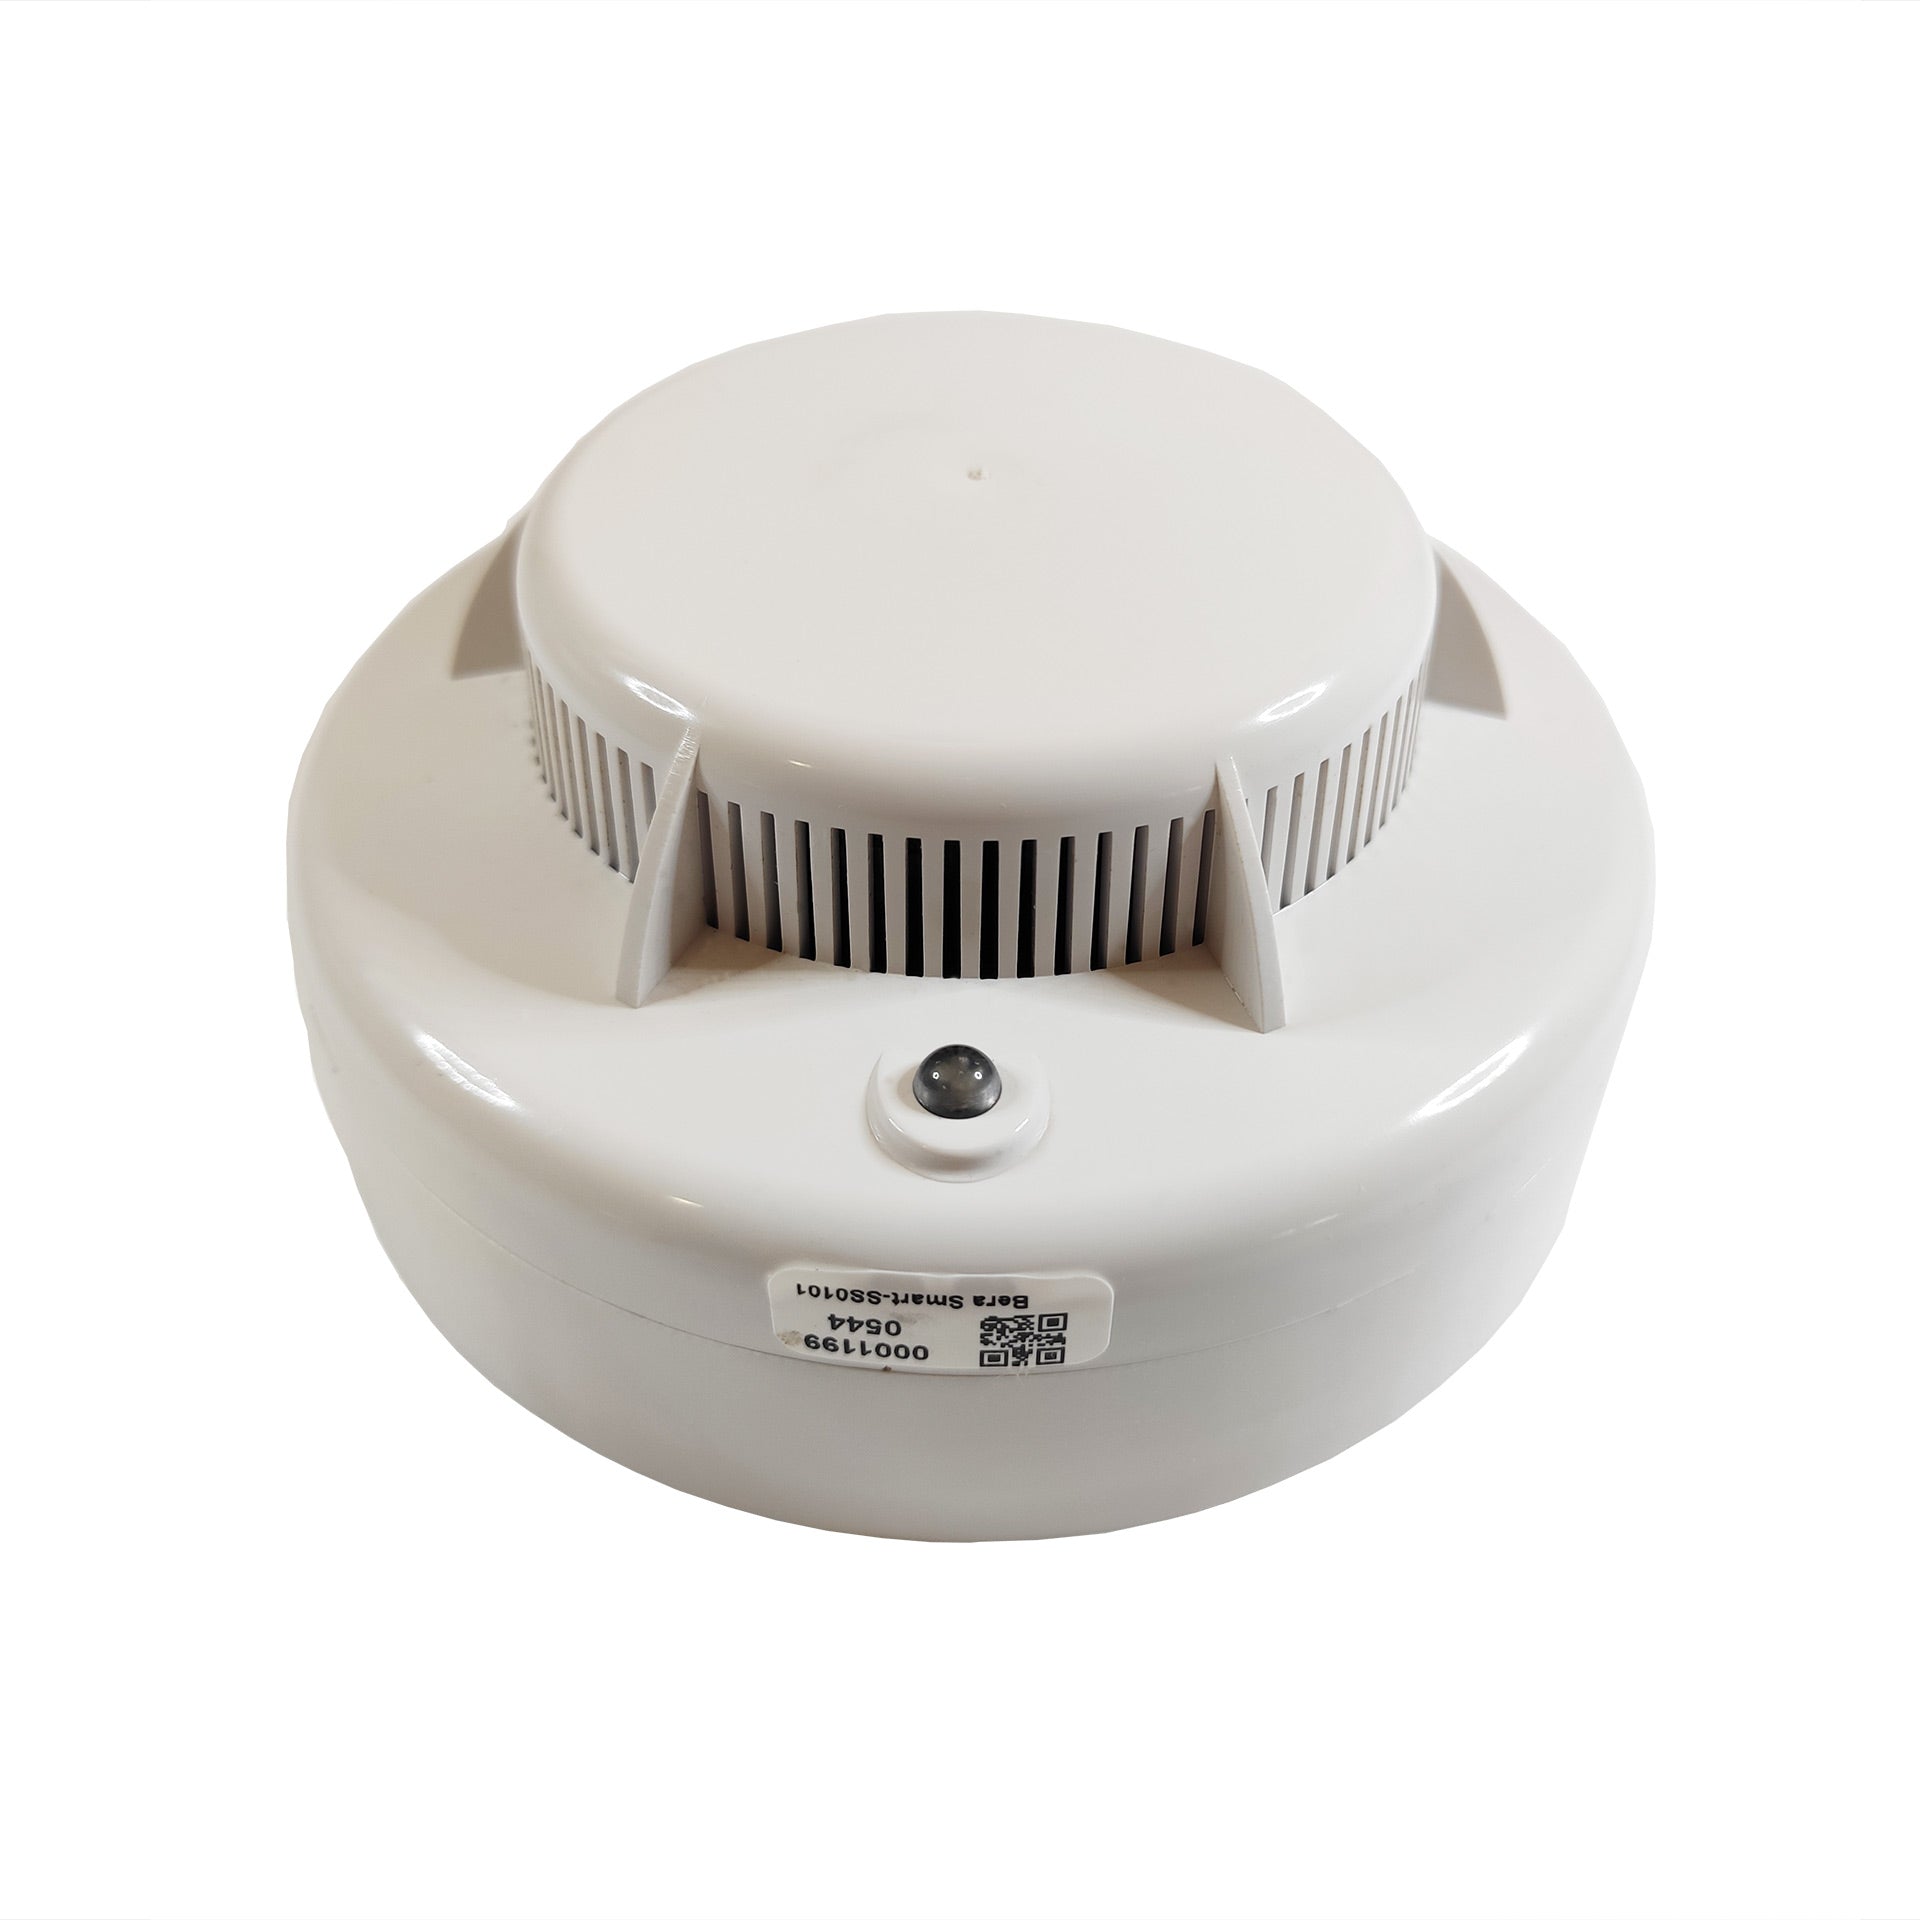 Smoke and Temperature Detector for Smartconnect unit